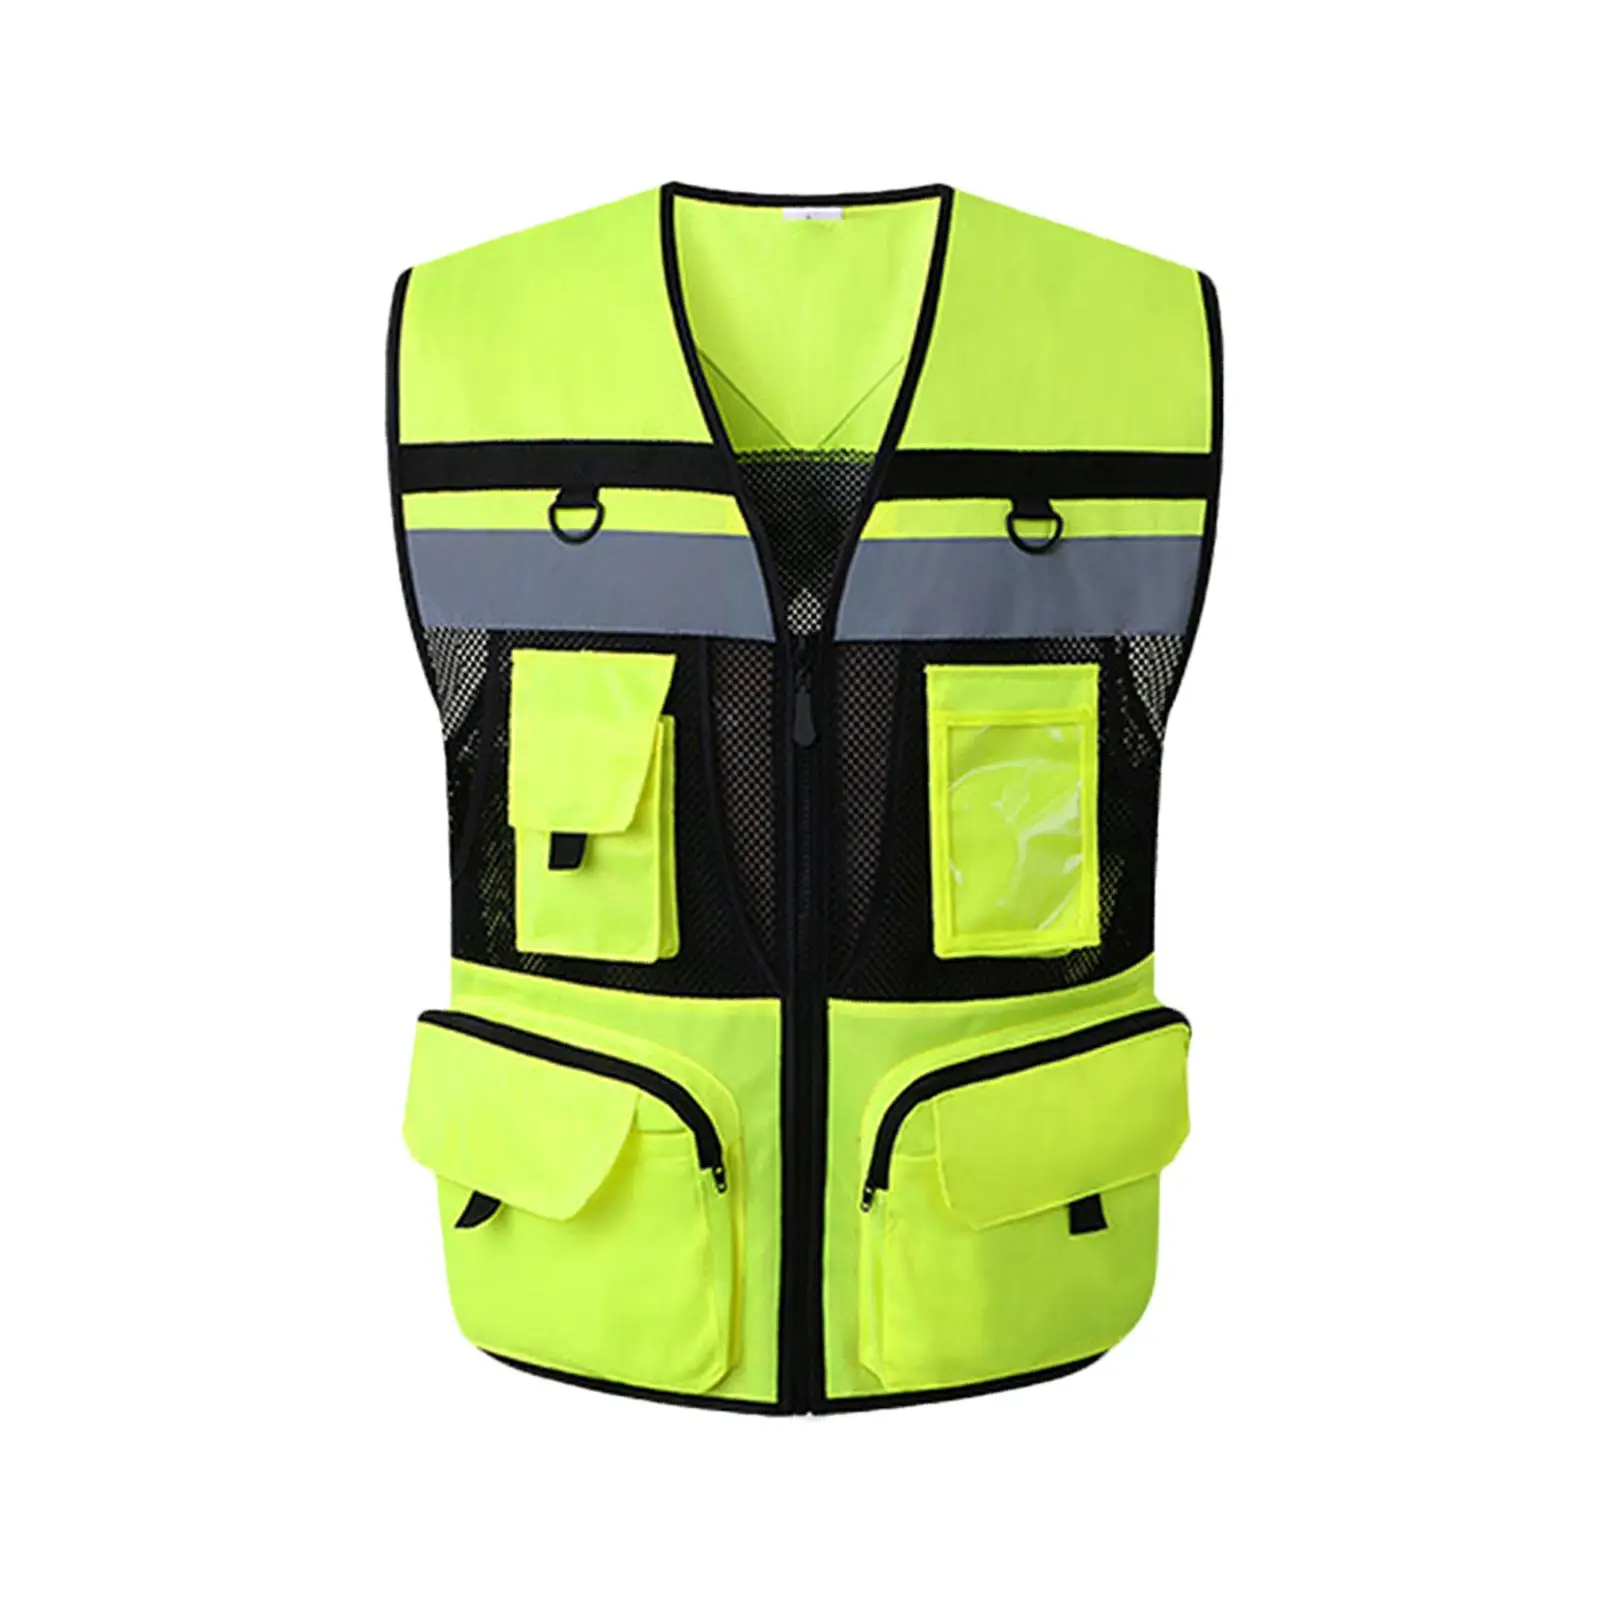 Reflective Vest with Pockets Running Gear High Visibility Lightweight